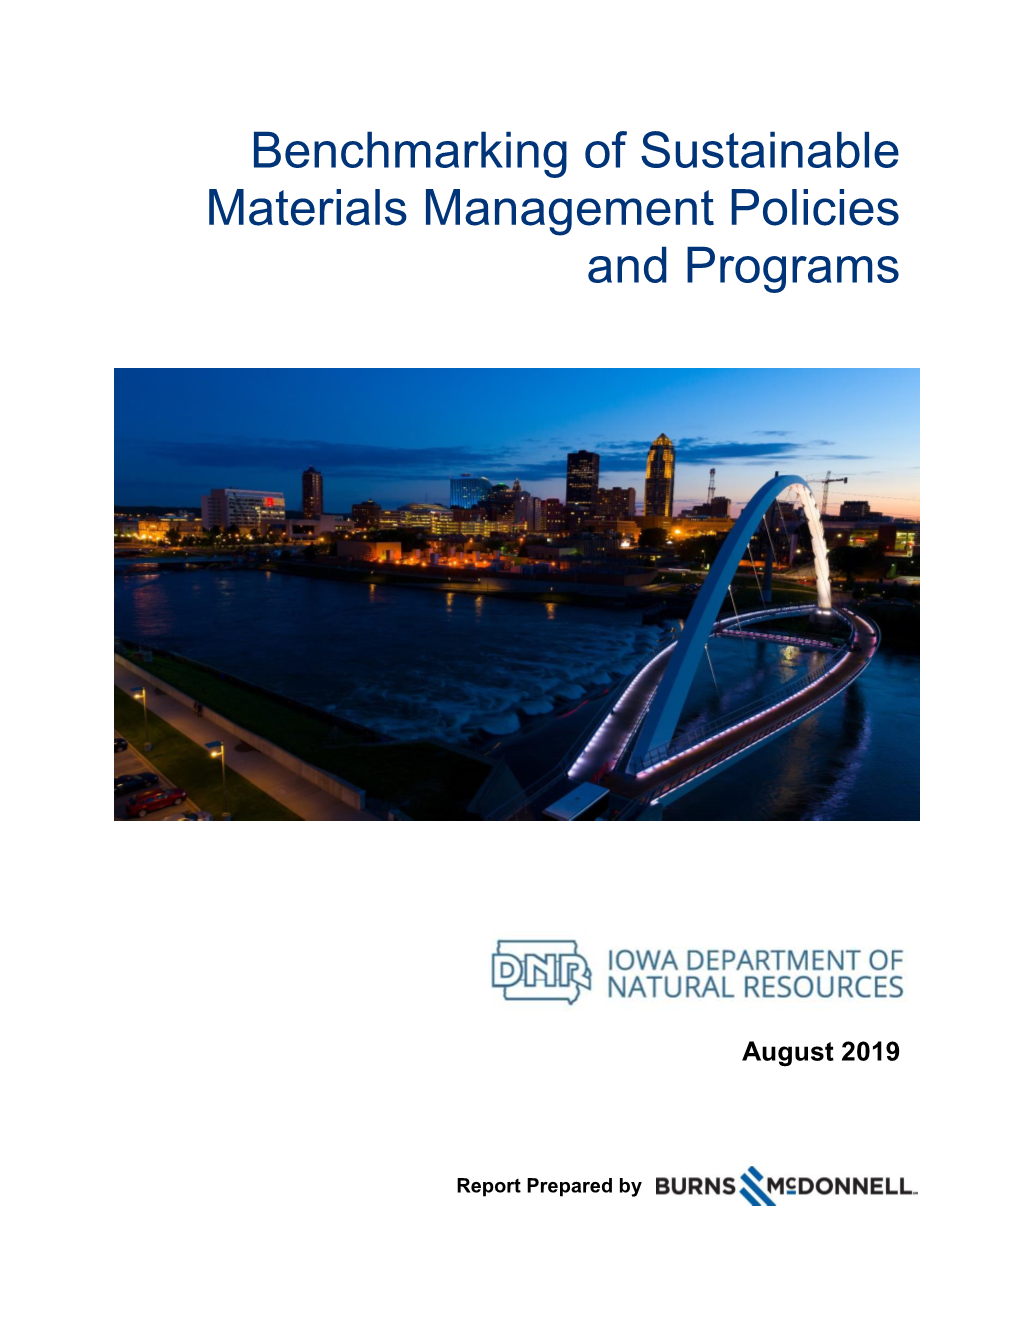 Benchmarking of Sustainable Materials Management Policies and Programs